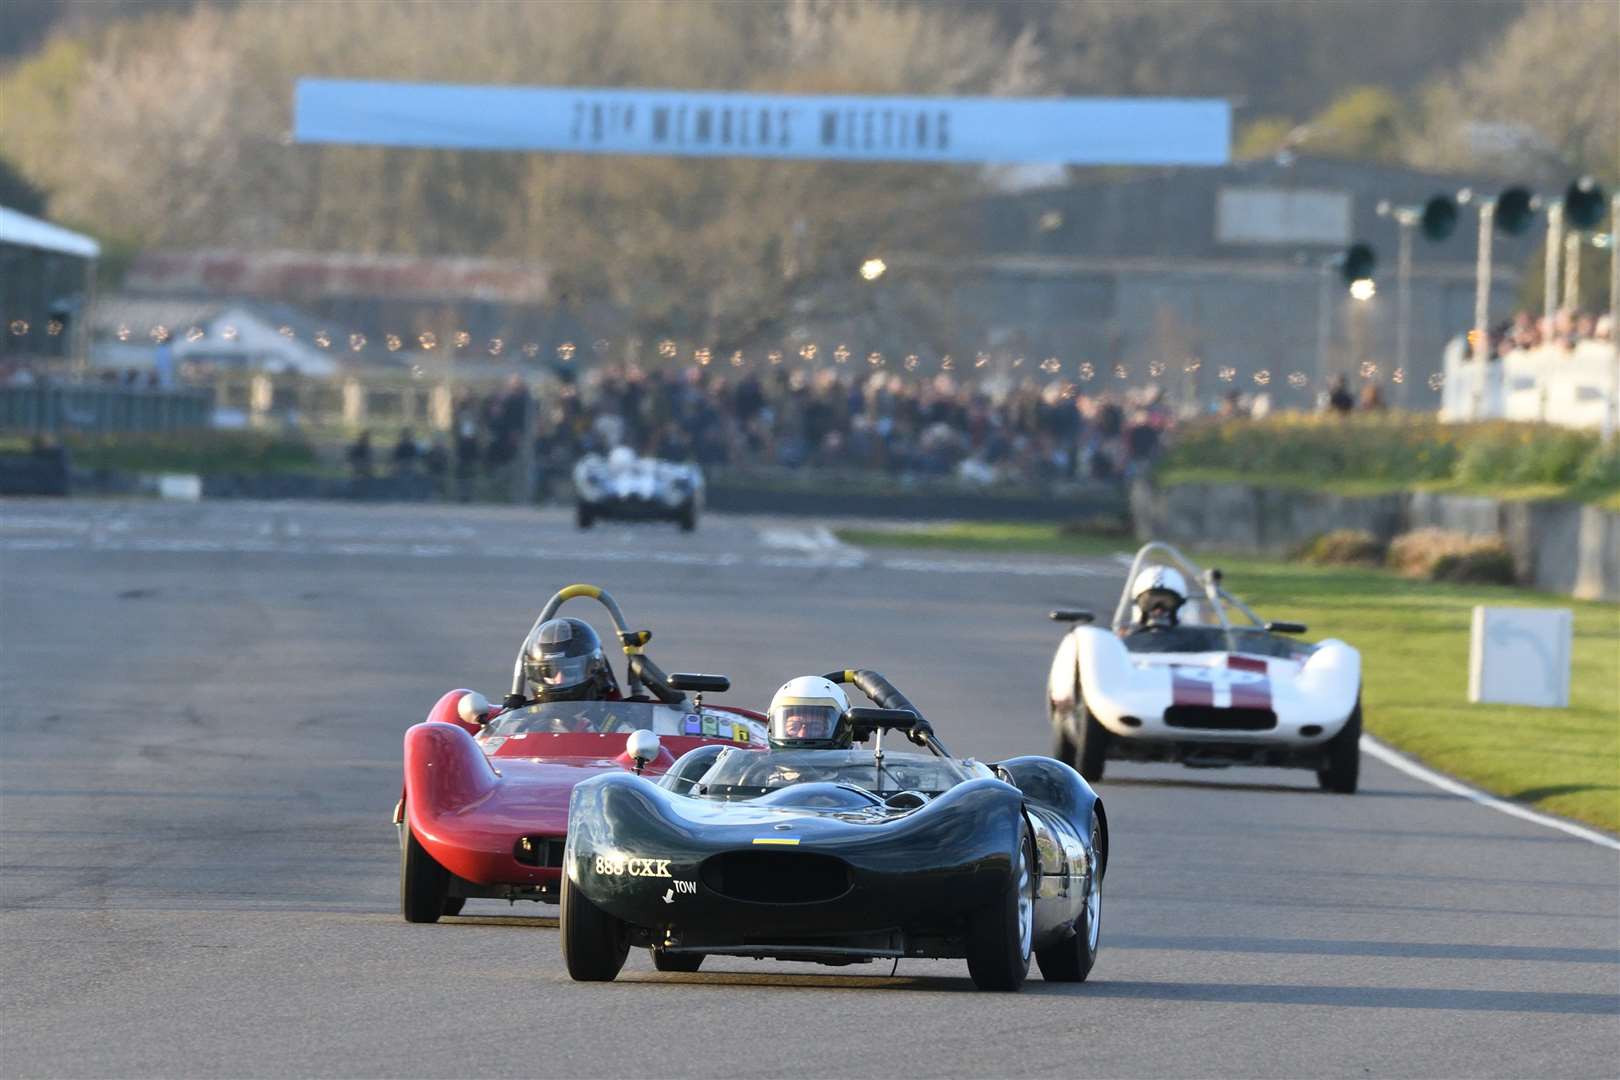 Patrick Watts, from Marden, finished 11th in the Robert Brooks Trophy race in a 1959 Rejo-Ford Mk3. Picture: Simon Hildrew